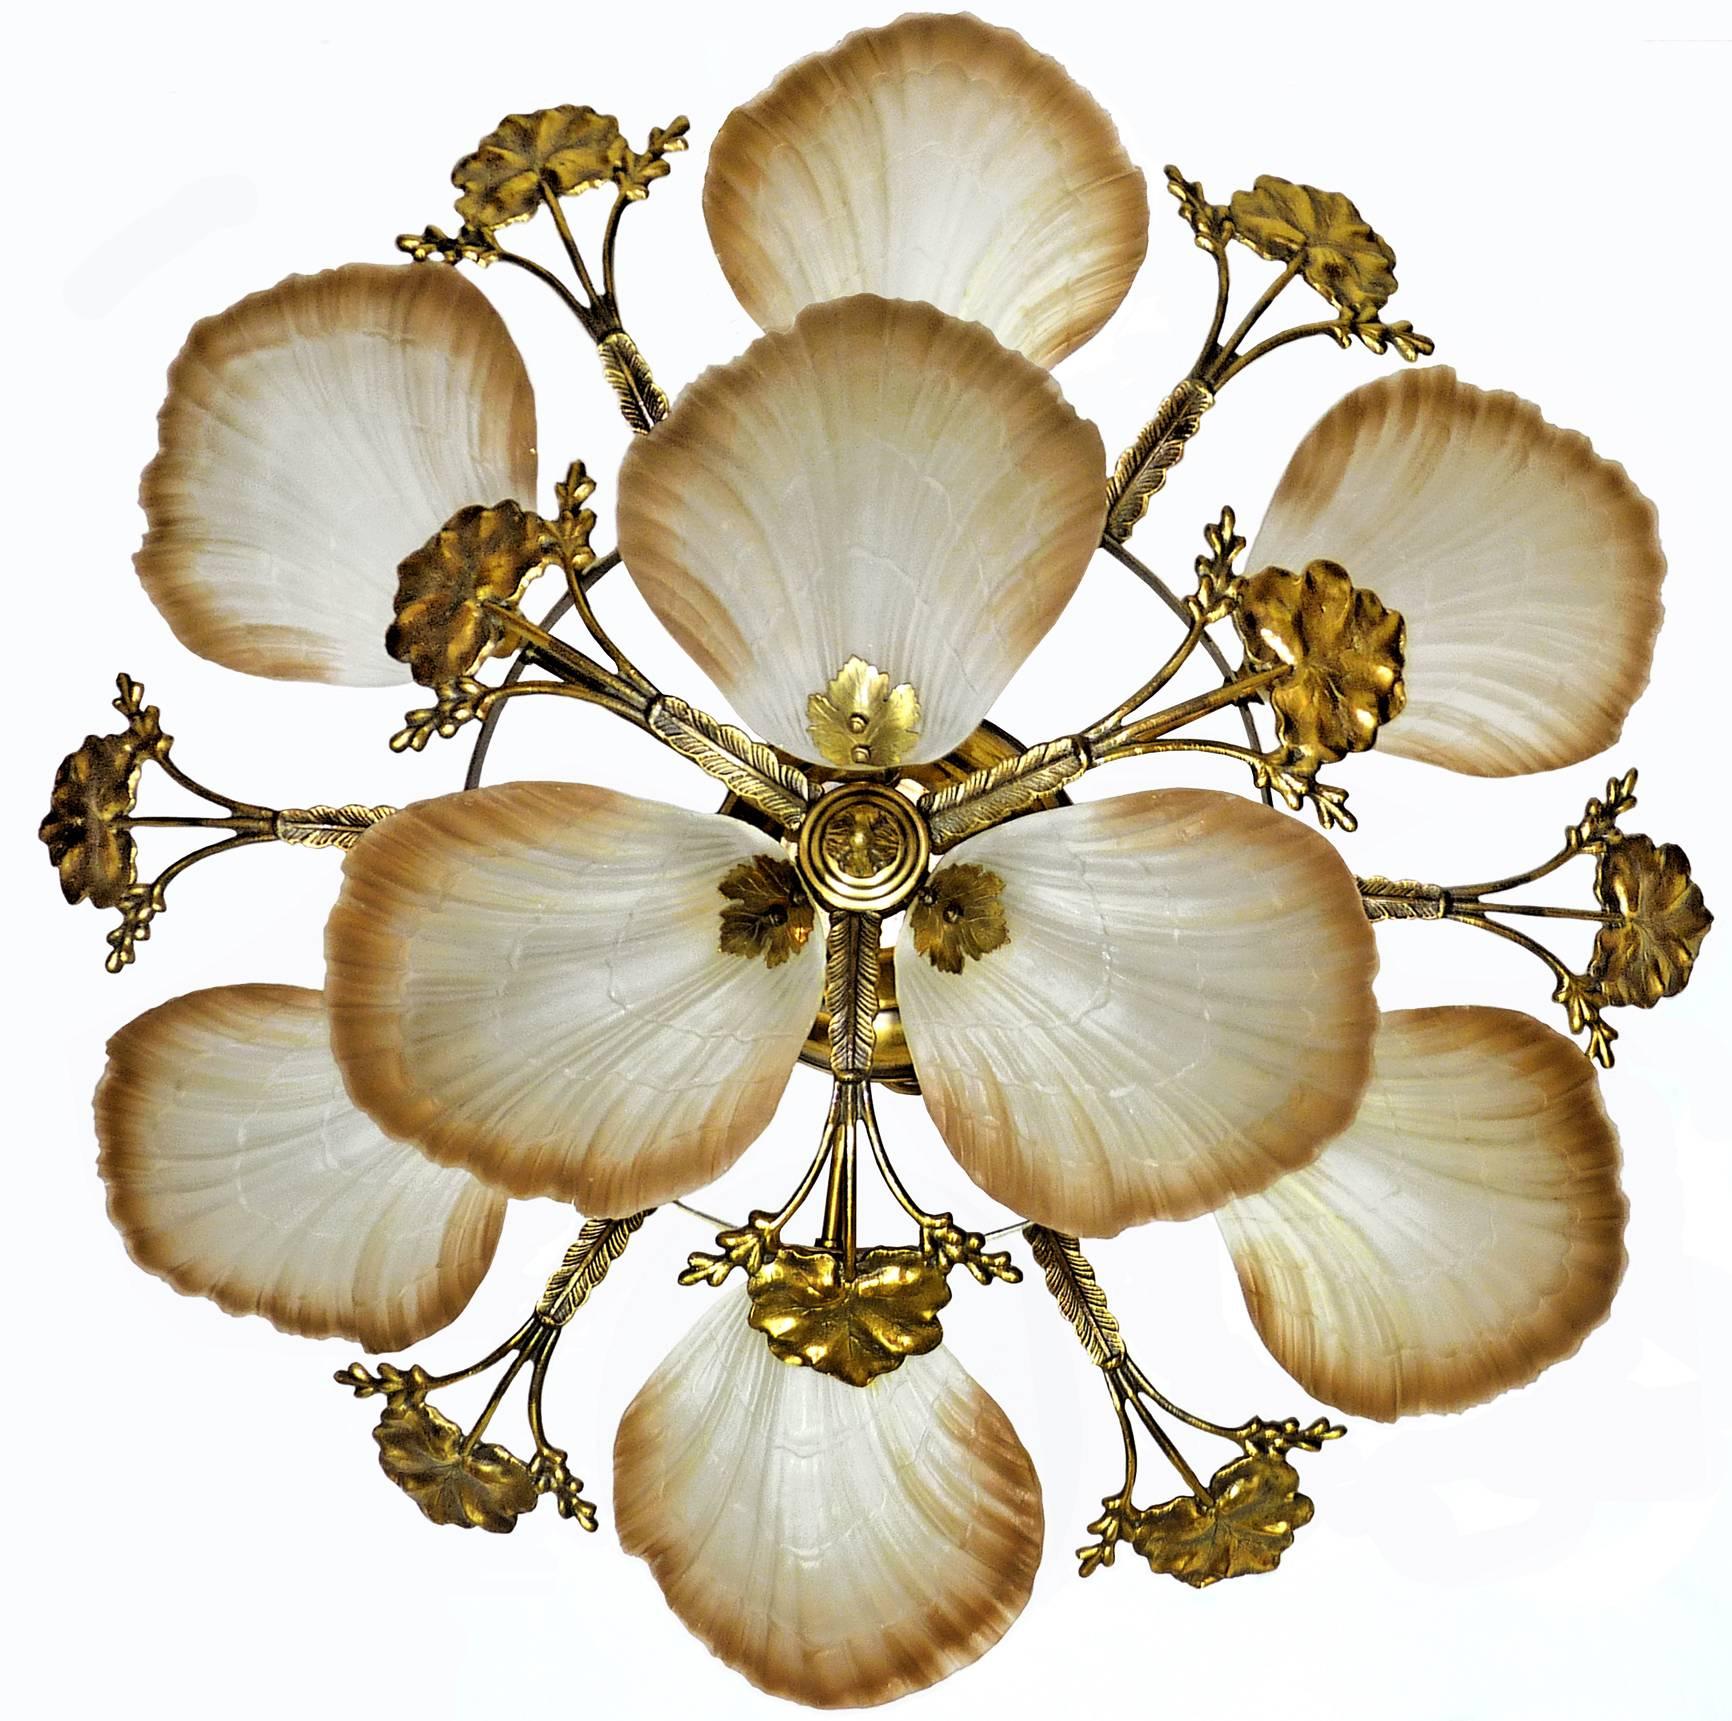 Art Nouveau style chandelier or flush mount with petal or shell shaped frosted glass and leaf design brass
Measures: 
Diameter 80 cm
Height 30 cm
Weight 12 Kg / 28 lb
Nine-light bulbs E14 Good working condition/European wiring.
Your item will